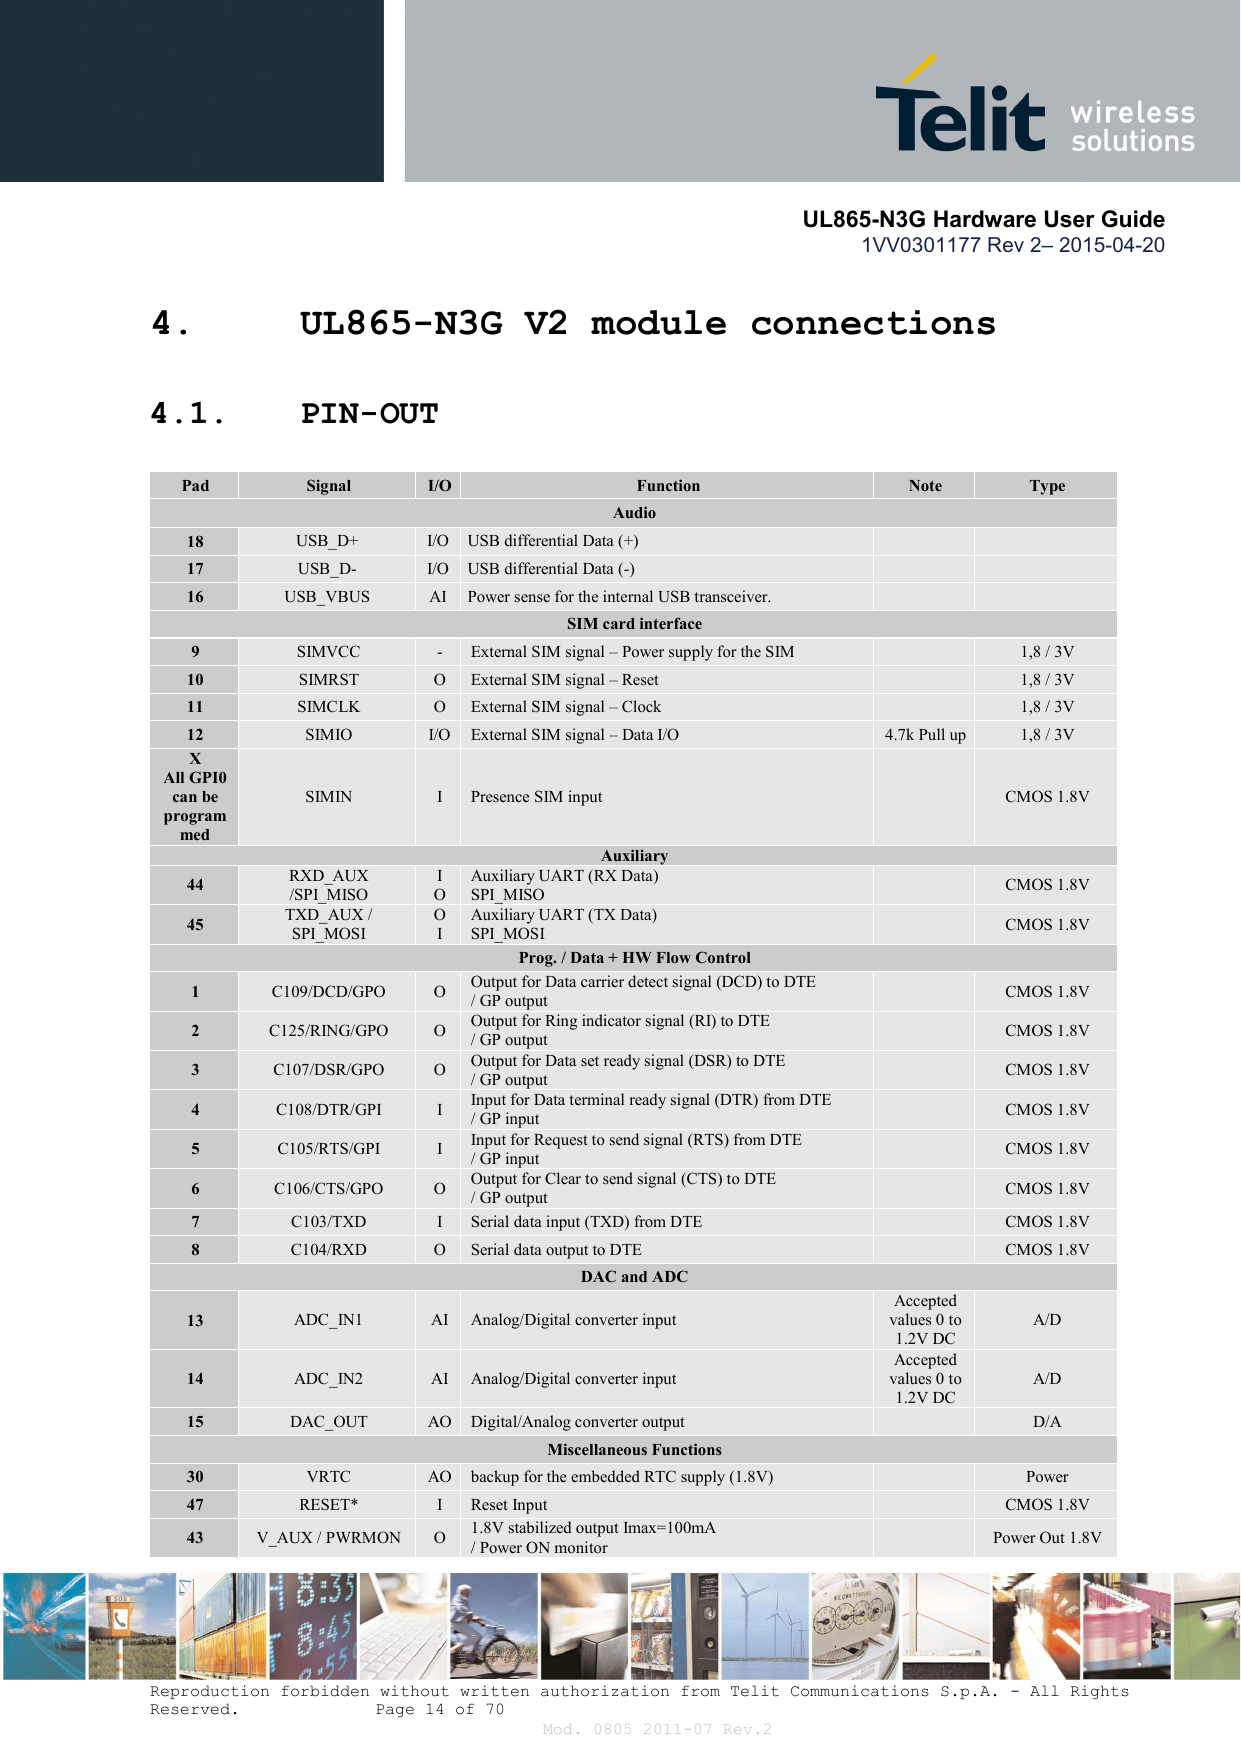       UL865-N3G Hardware User Guide 1VV0301177 Rev 2– 2015-04-20  Reproduction forbidden without written authorization from Telit Communications S.p.A. - All Rights Reserved.    Page 14 of 70 Mod. 0805 2011-07 Rev.2 4. UL865-N3G V2 module connections  4.1. PIN-OUT Pad  Signal  I/O Function  Note  Type Audio 18  USB_D+  I/O  USB differential Data (+)     17  USB_D-  I/O  USB differential Data (-)     16  USB_VBUS  AI  Power sense for the internal USB transceiver.     SIM card interface 9  SIMVCC  -  External SIM signal – Power supply for the SIM    1,8 / 3V 10  SIMRST  O  External SIM signal – Reset    1,8 / 3V 11  SIMCLK  O  External SIM signal – Clock    1,8 / 3V 12  SIMIO  I/O  External SIM signal – Data I/O  4.7k Pull up 1,8 / 3V X All GPI0 can be  programmed SIMIN  I  Presence SIM input    CMOS 1.8V Auxiliary 44  RXD_AUX /SPI_MISO I O Auxiliary UART (RX Data) SPI_MISO    CMOS 1.8V 45  TXD_AUX / SPI_MOSI O I Auxiliary UART (TX Data) SPI_MOSI    CMOS 1.8V Prog. / Data + HW Flow Control 1  C109/DCD/GPO  O  Output for Data carrier detect signal (DCD) to DTE  / GP output    CMOS 1.8V 2  C125/RING/GPO  O  Output for Ring indicator signal (RI) to DTE / GP output    CMOS 1.8V 3  C107/DSR/GPO  O  Output for Data set ready signal (DSR) to DTE / GP output    CMOS 1.8V 4  C108/DTR/GPI  I  Input for Data terminal ready signal (DTR) from DTE / GP input    CMOS 1.8V 5  C105/RTS/GPI  I  Input for Request to send signal (RTS) from DTE / GP input    CMOS 1.8V 6  C106/CTS/GPO  O  Output for Clear to send signal (CTS) to DTE / GP output    CMOS 1.8V 7  C103/TXD  I  Serial data input (TXD) from DTE    CMOS 1.8V 8  C104/RXD  O  Serial data output to DTE    CMOS 1.8V DAC and ADC 13  ADC_IN1  AI  Analog/Digital converter input Accepted values 0 to 1.2V DC A/D 14  ADC_IN2  AI  Analog/Digital converter input Accepted values 0 to 1.2V DC A/D 15  DAC_OUT  AO Digital/Analog converter output    D/A Miscellaneous Functions 30  VRTC  AO backup for the embedded RTC supply (1.8V)    Power 47  RESET*  I  Reset Input    CMOS 1.8V 43  V_AUX / PWRMON  O  1.8V stabilized output Imax=100mA / Power ON monitor     Power Out 1.8V 